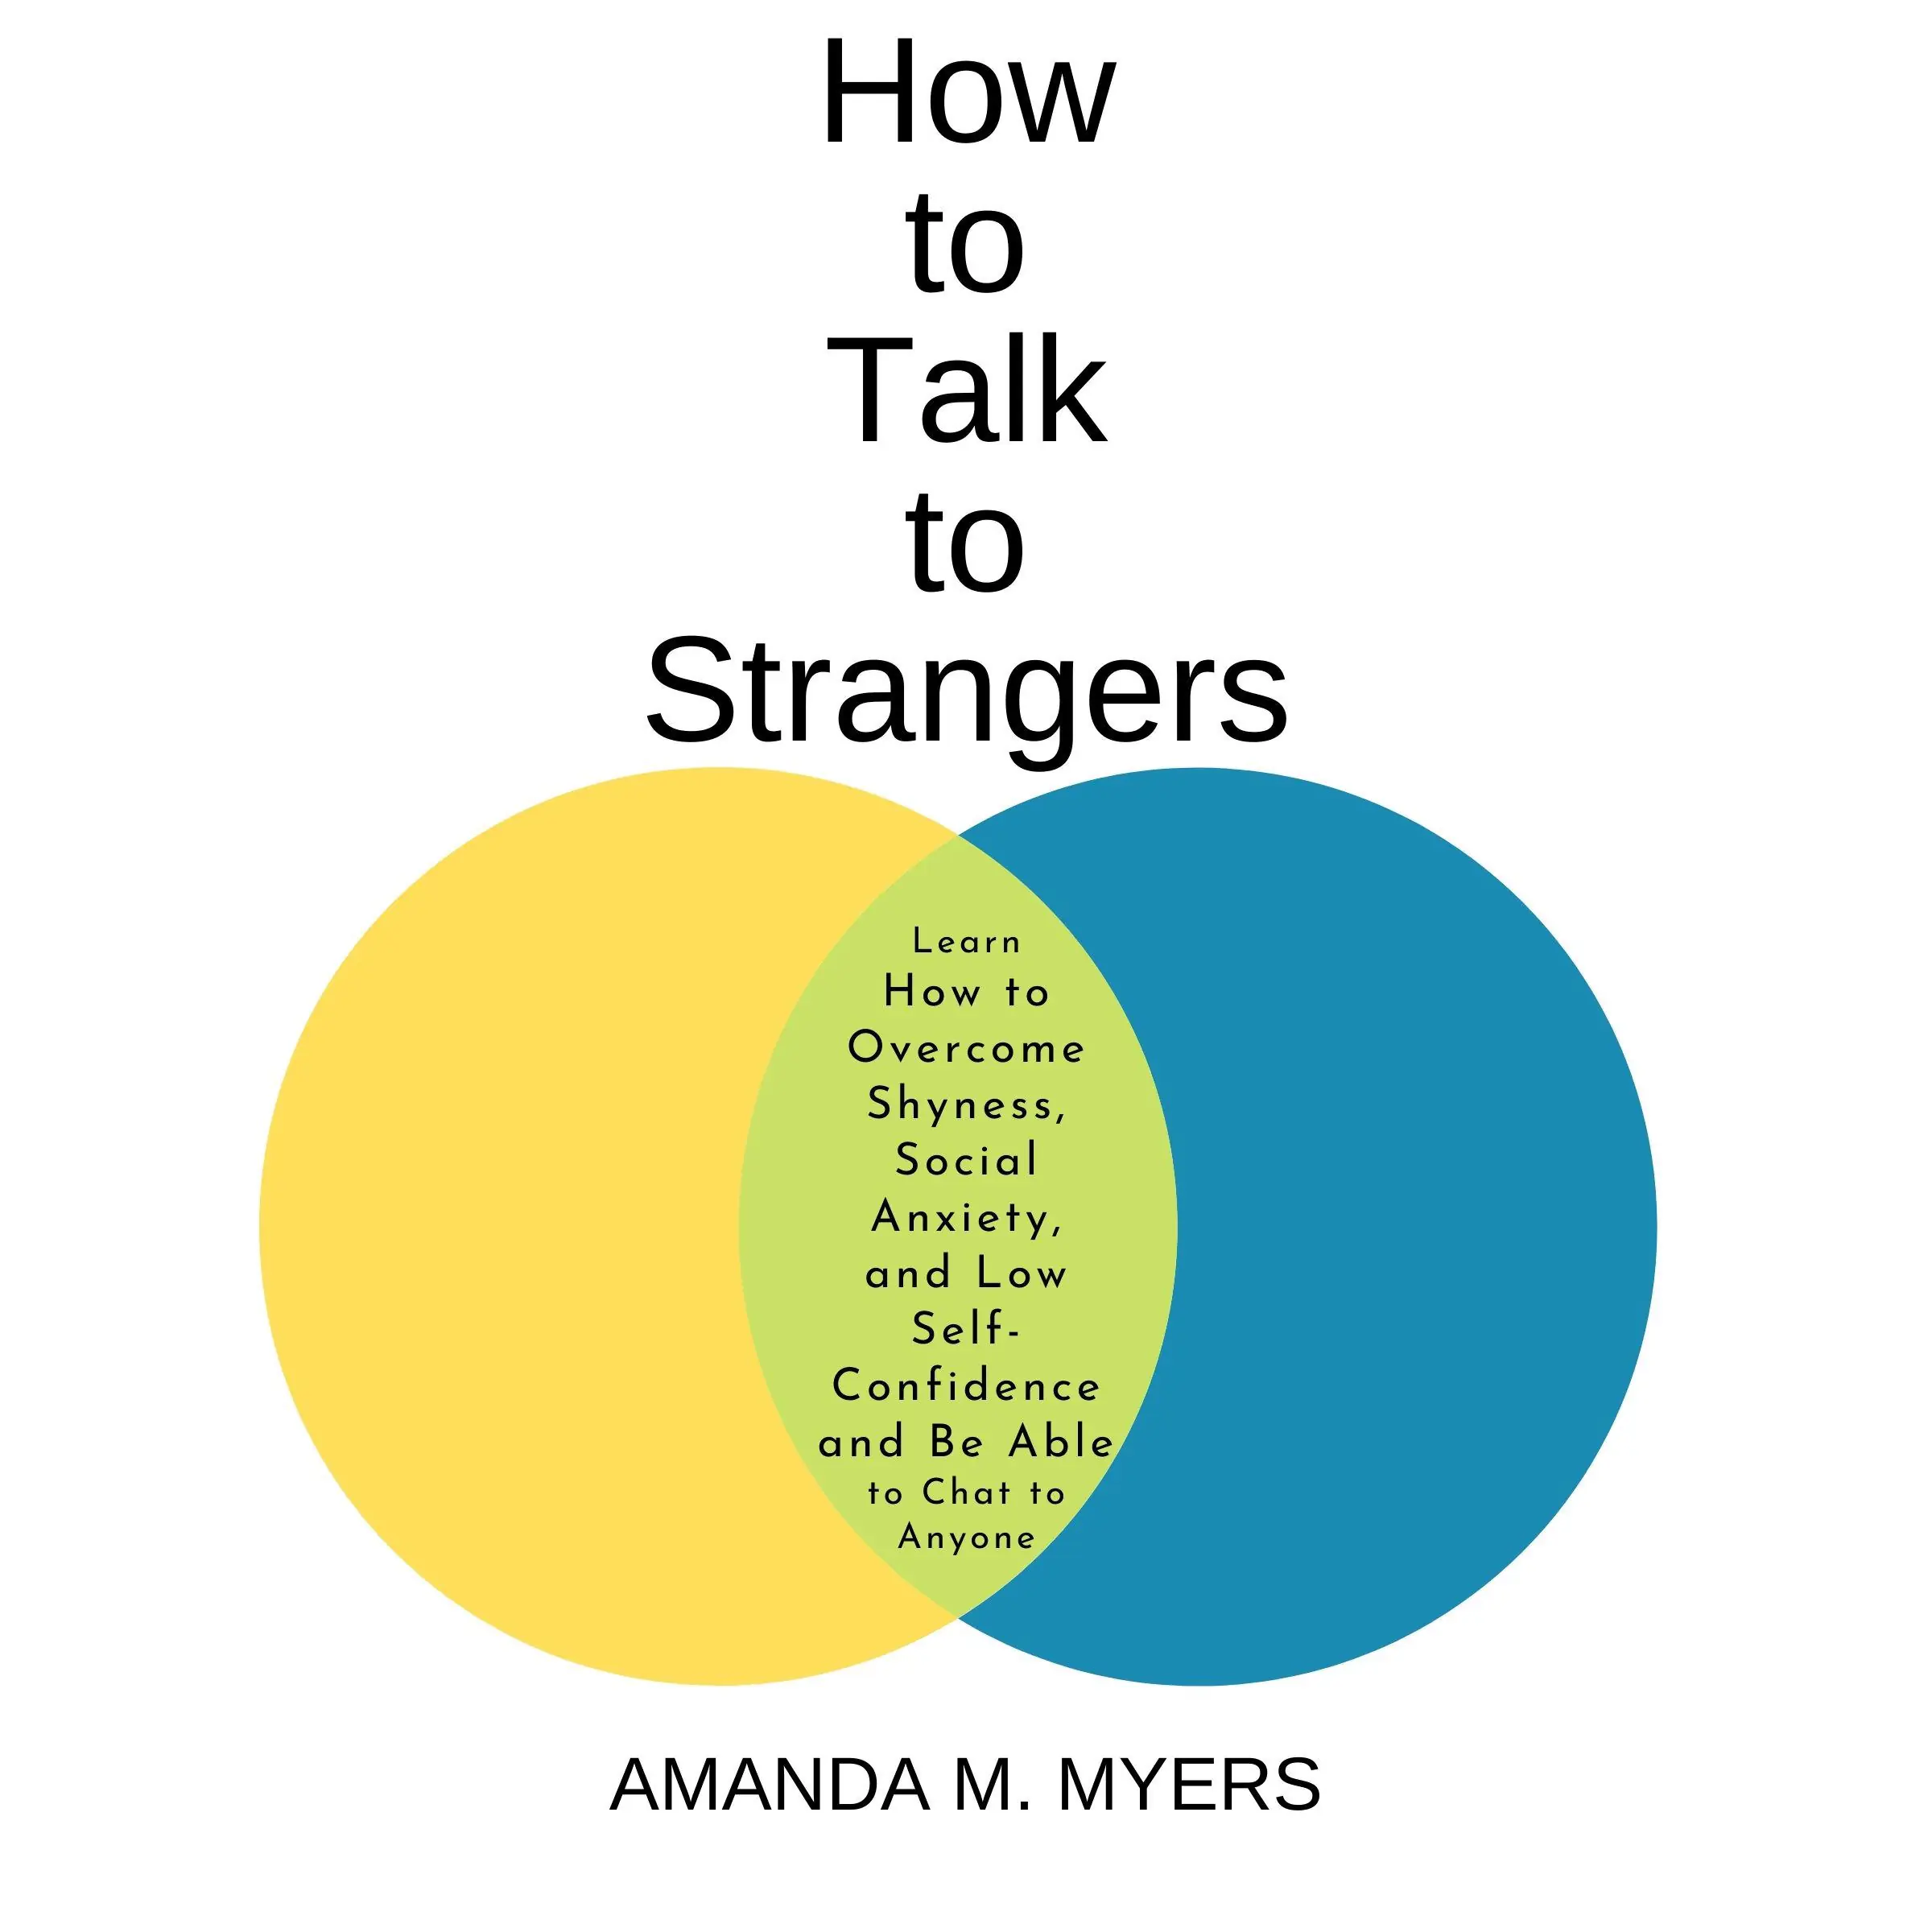 How to Talk to Strangers Audiobook by Amanda M. Myers